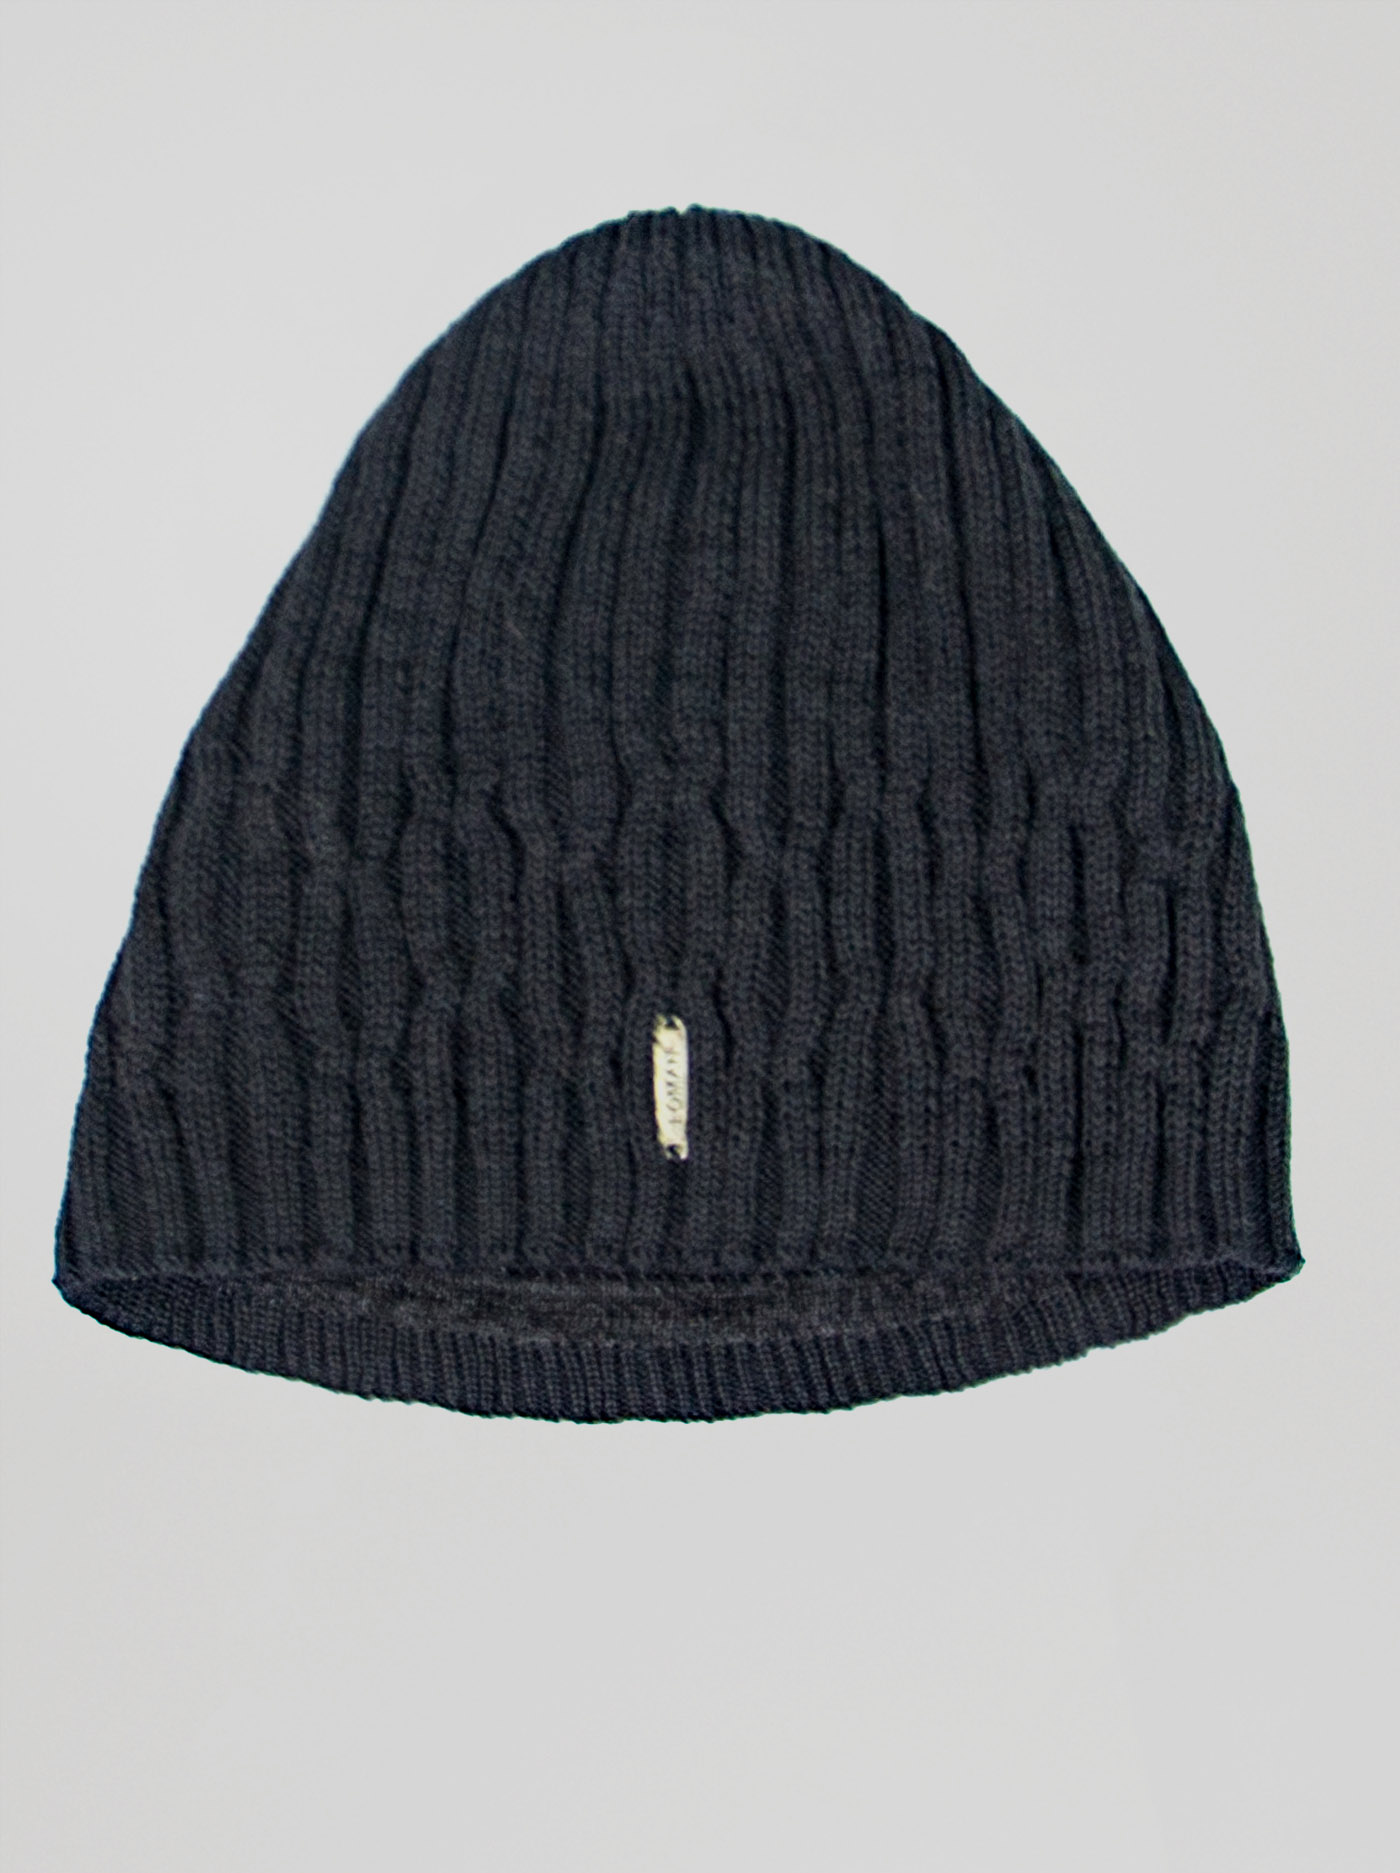 Cap with wool - Loman image 1